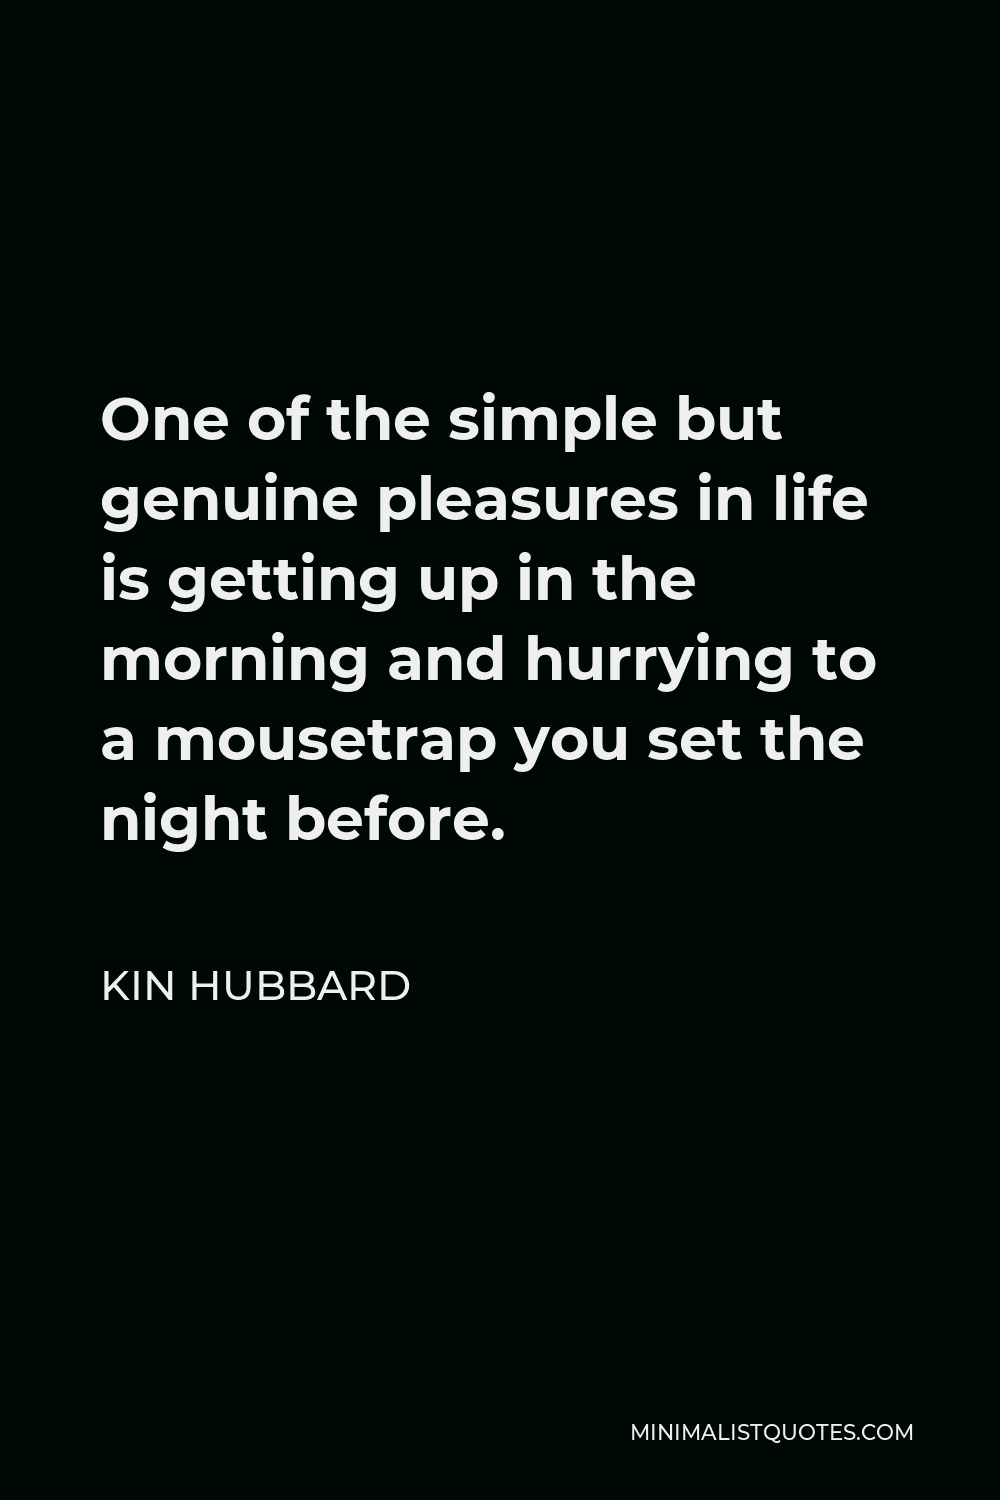 Kin Hubbard Quote - One of the simple but genuine pleasures in life is getting up in the morning and hurrying to a mousetrap you set the night before.